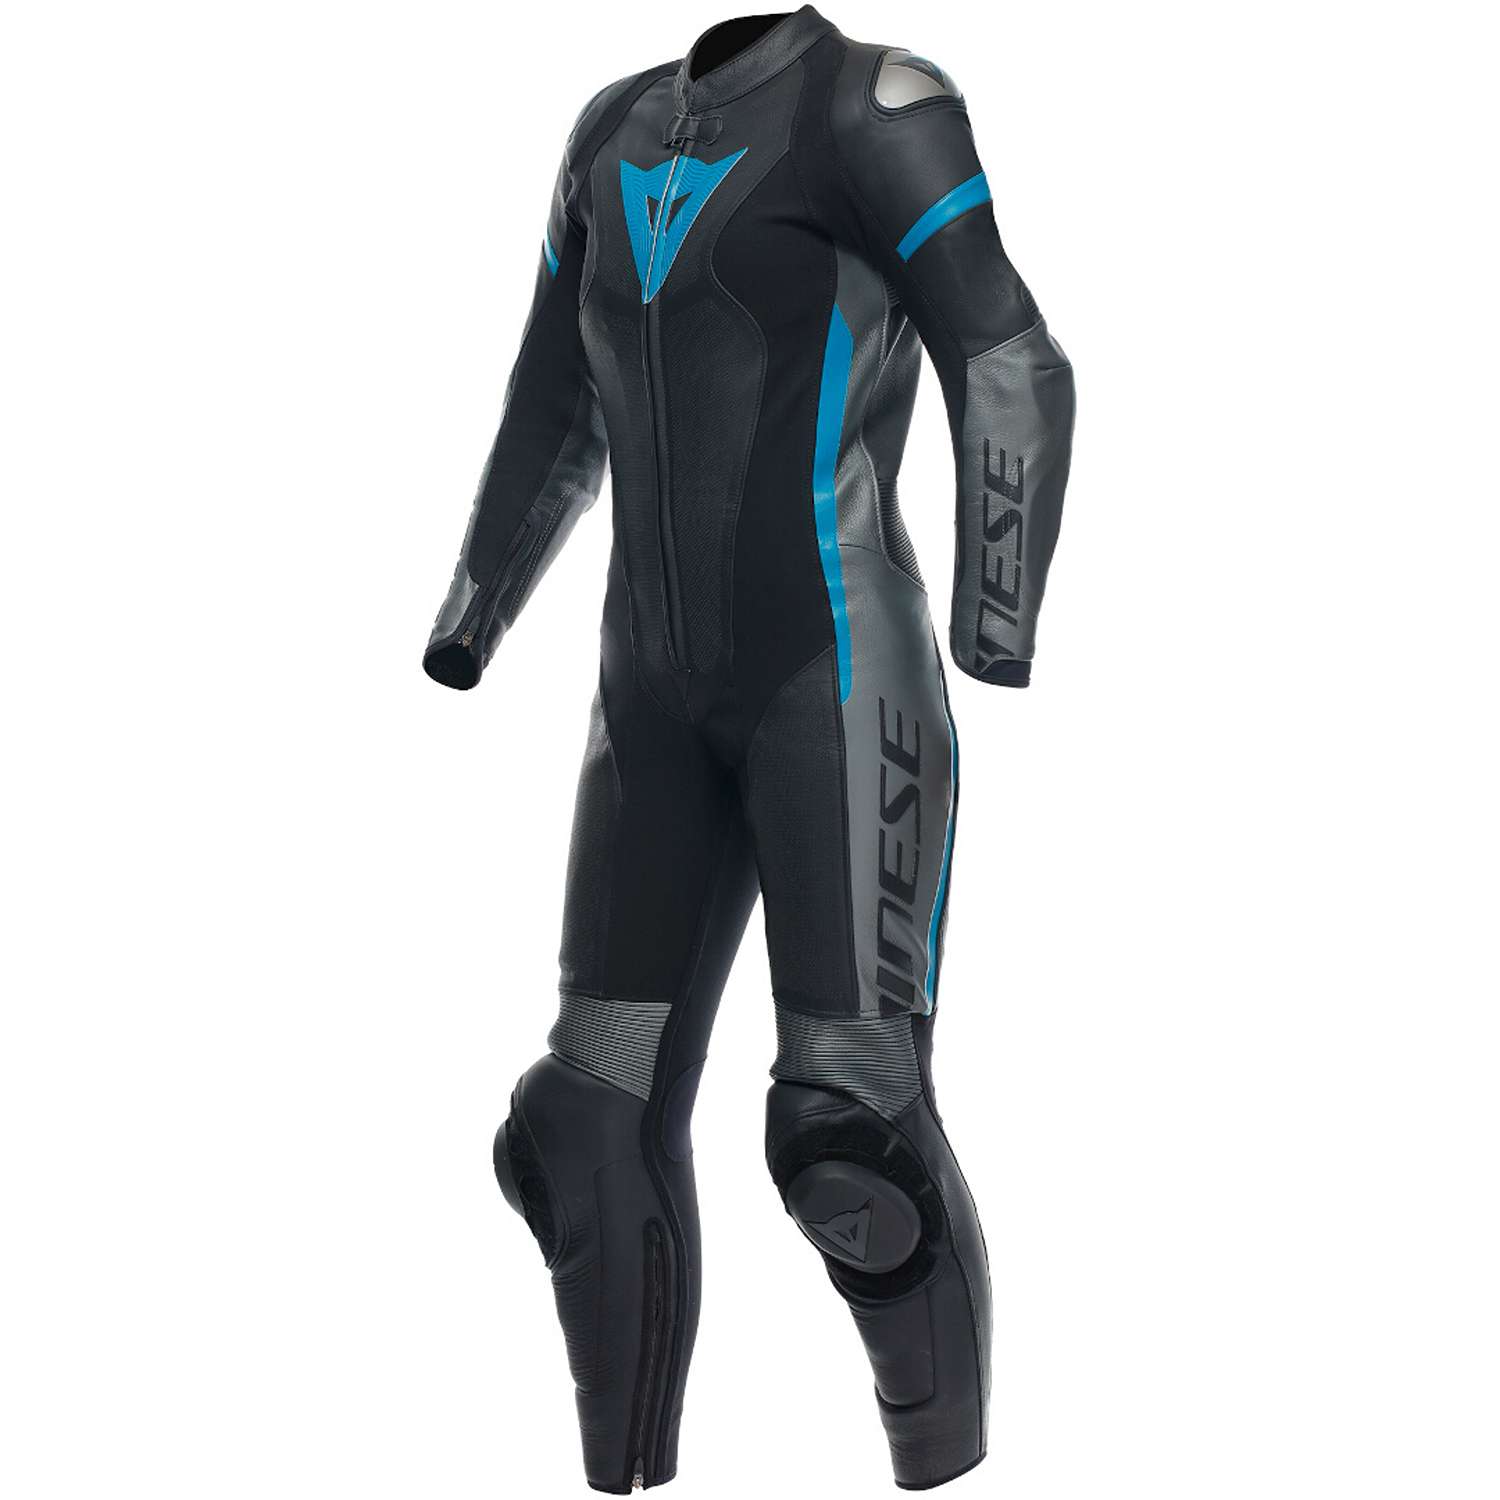 Image of Dainese Grobnik Lady Leather 1Pc Suit Perf Black Anthracite Teal Size 50 ID 8051019498199